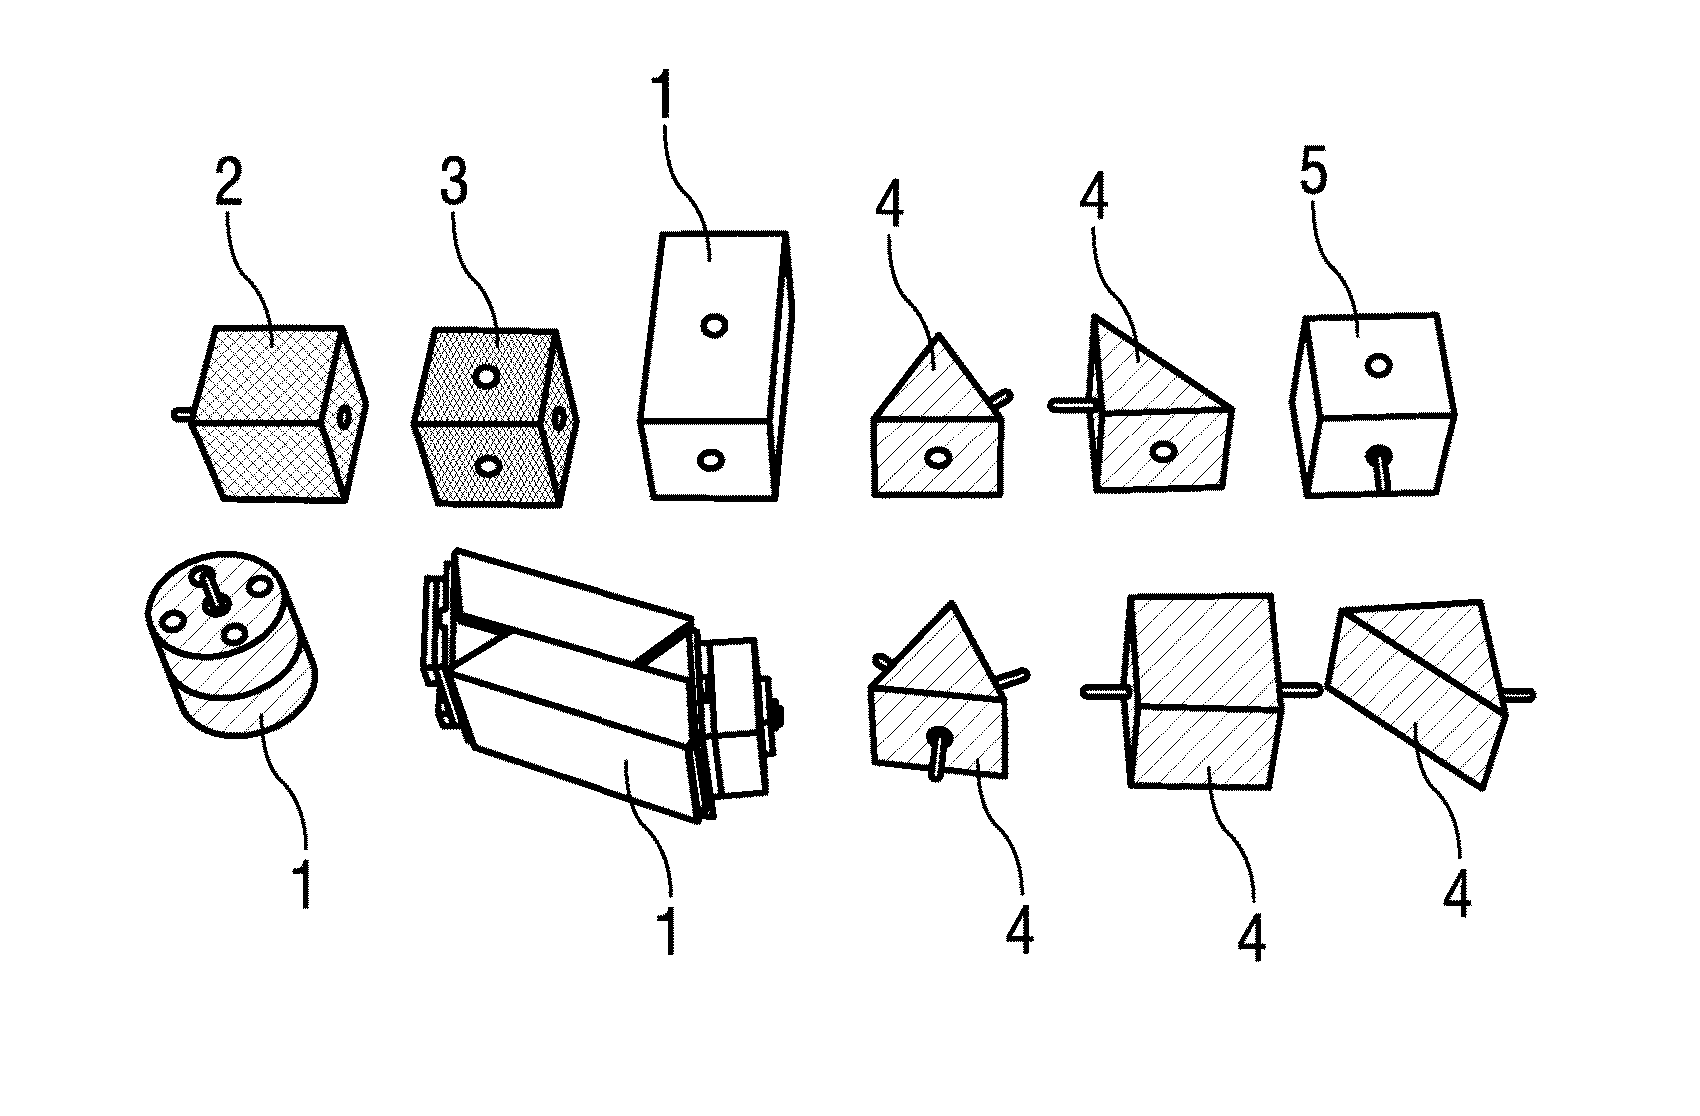 Building block system with moveable modules